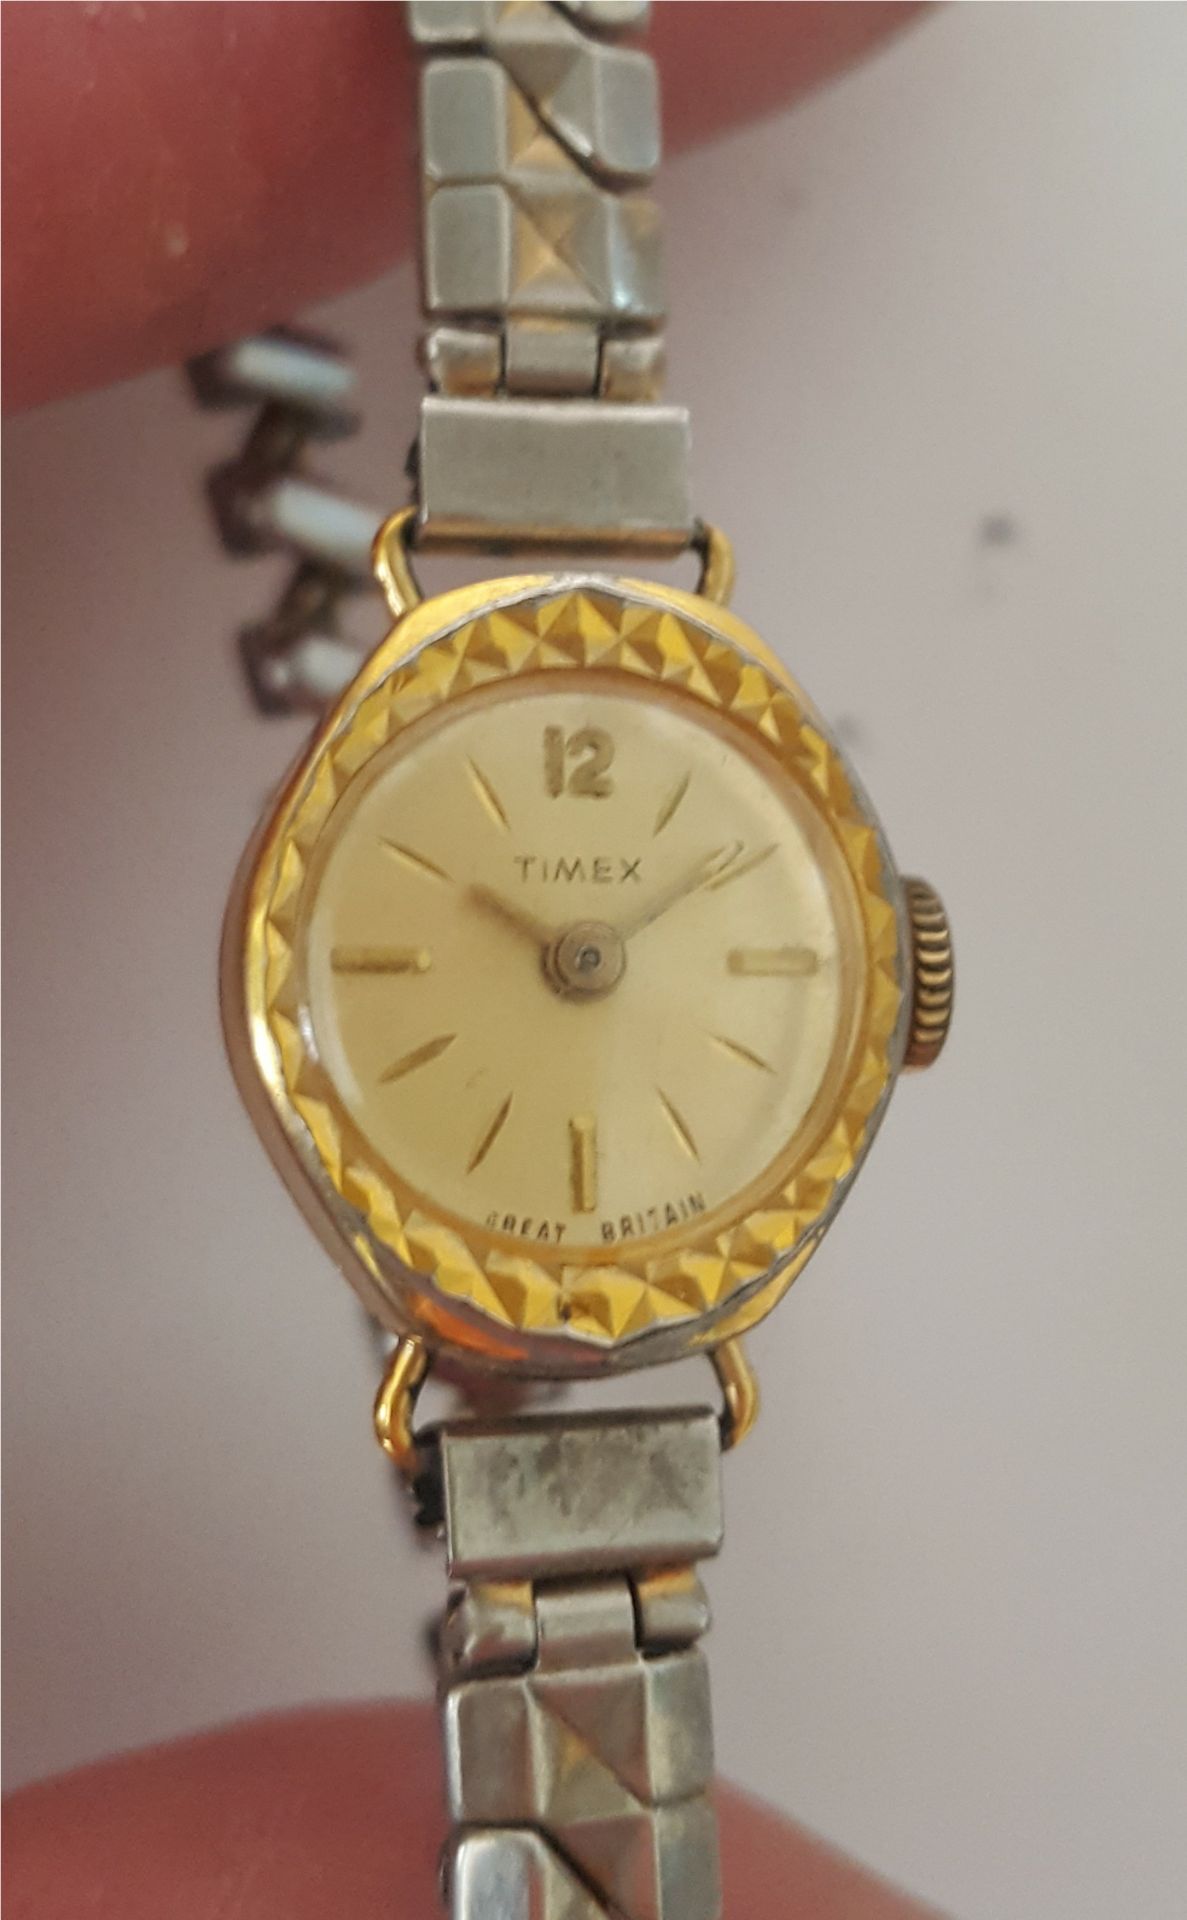 Vintage Cocktail Watches 2 x Timex No Reserve - Image 3 of 3